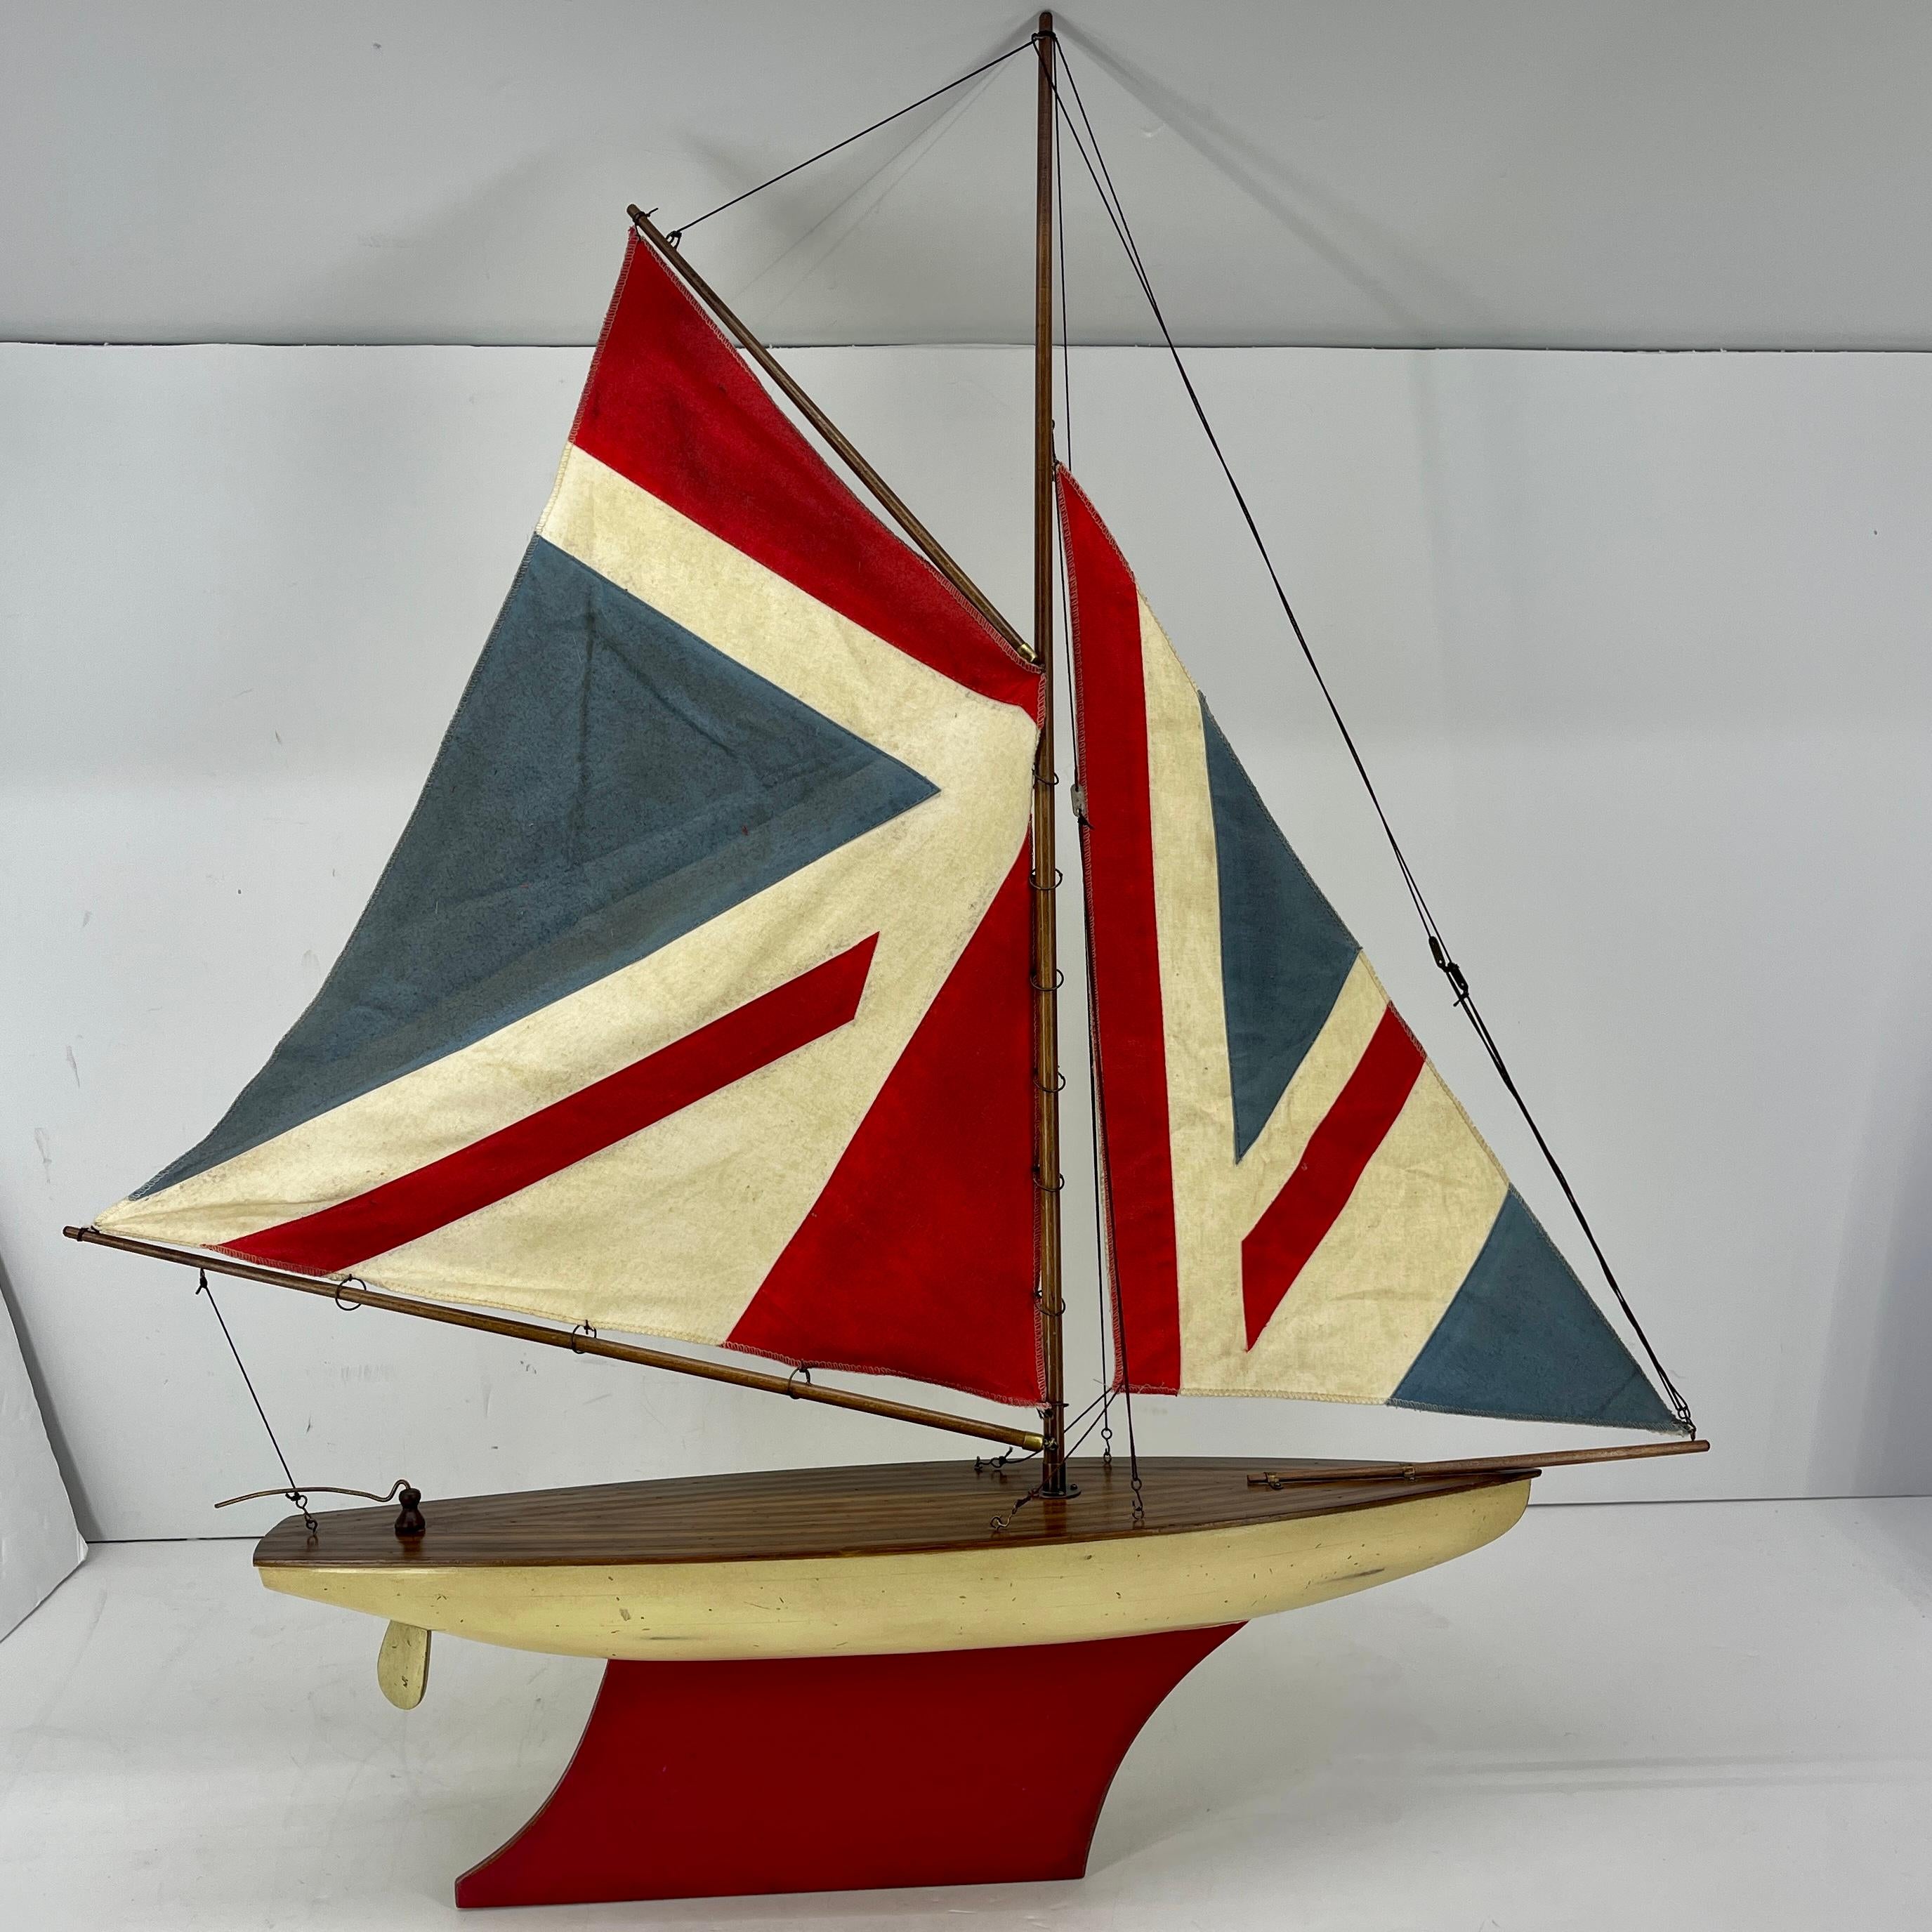 Hand-Crafted English Carved Wood Sailboat Model with Parquetry Deck and Union Jack Sailcloth